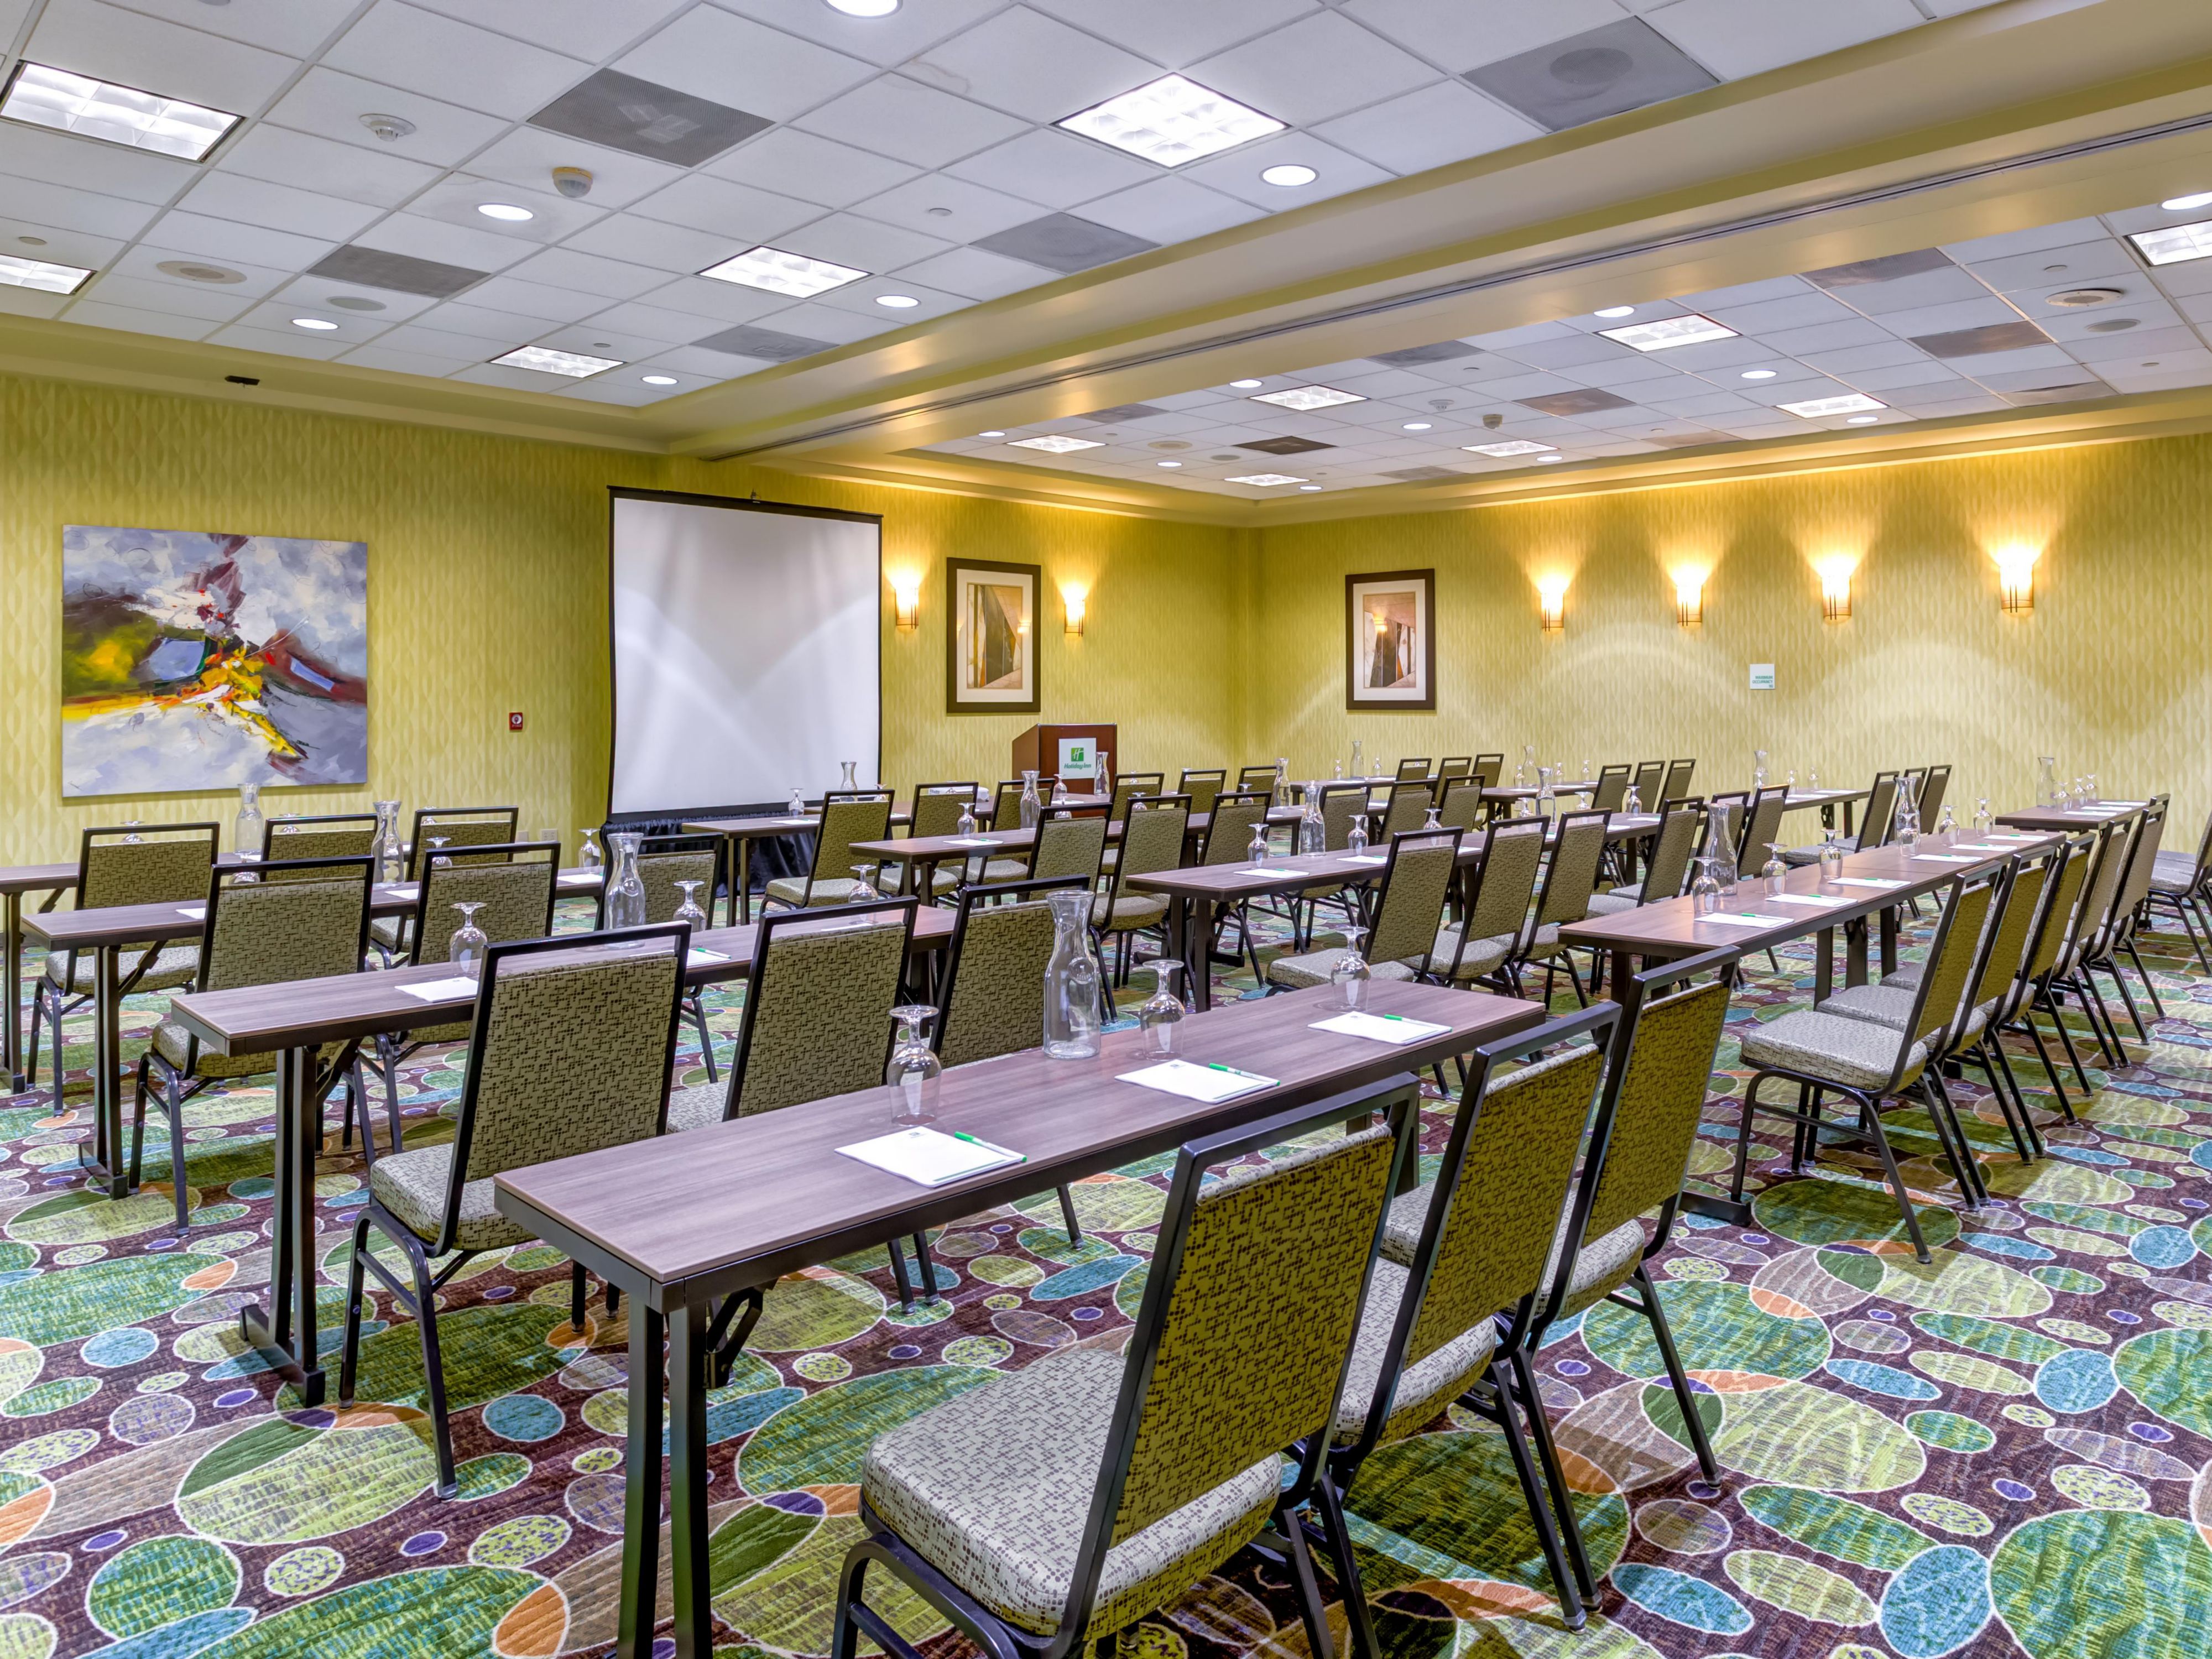 For guests who need to host an event in Carmel, Indiana the hotel offers 2,500 sq ft of meeting space comprised of three rooms, including one ballroom that can accommodate up to 120 people. On-site event specialists and on-site catering options are available.